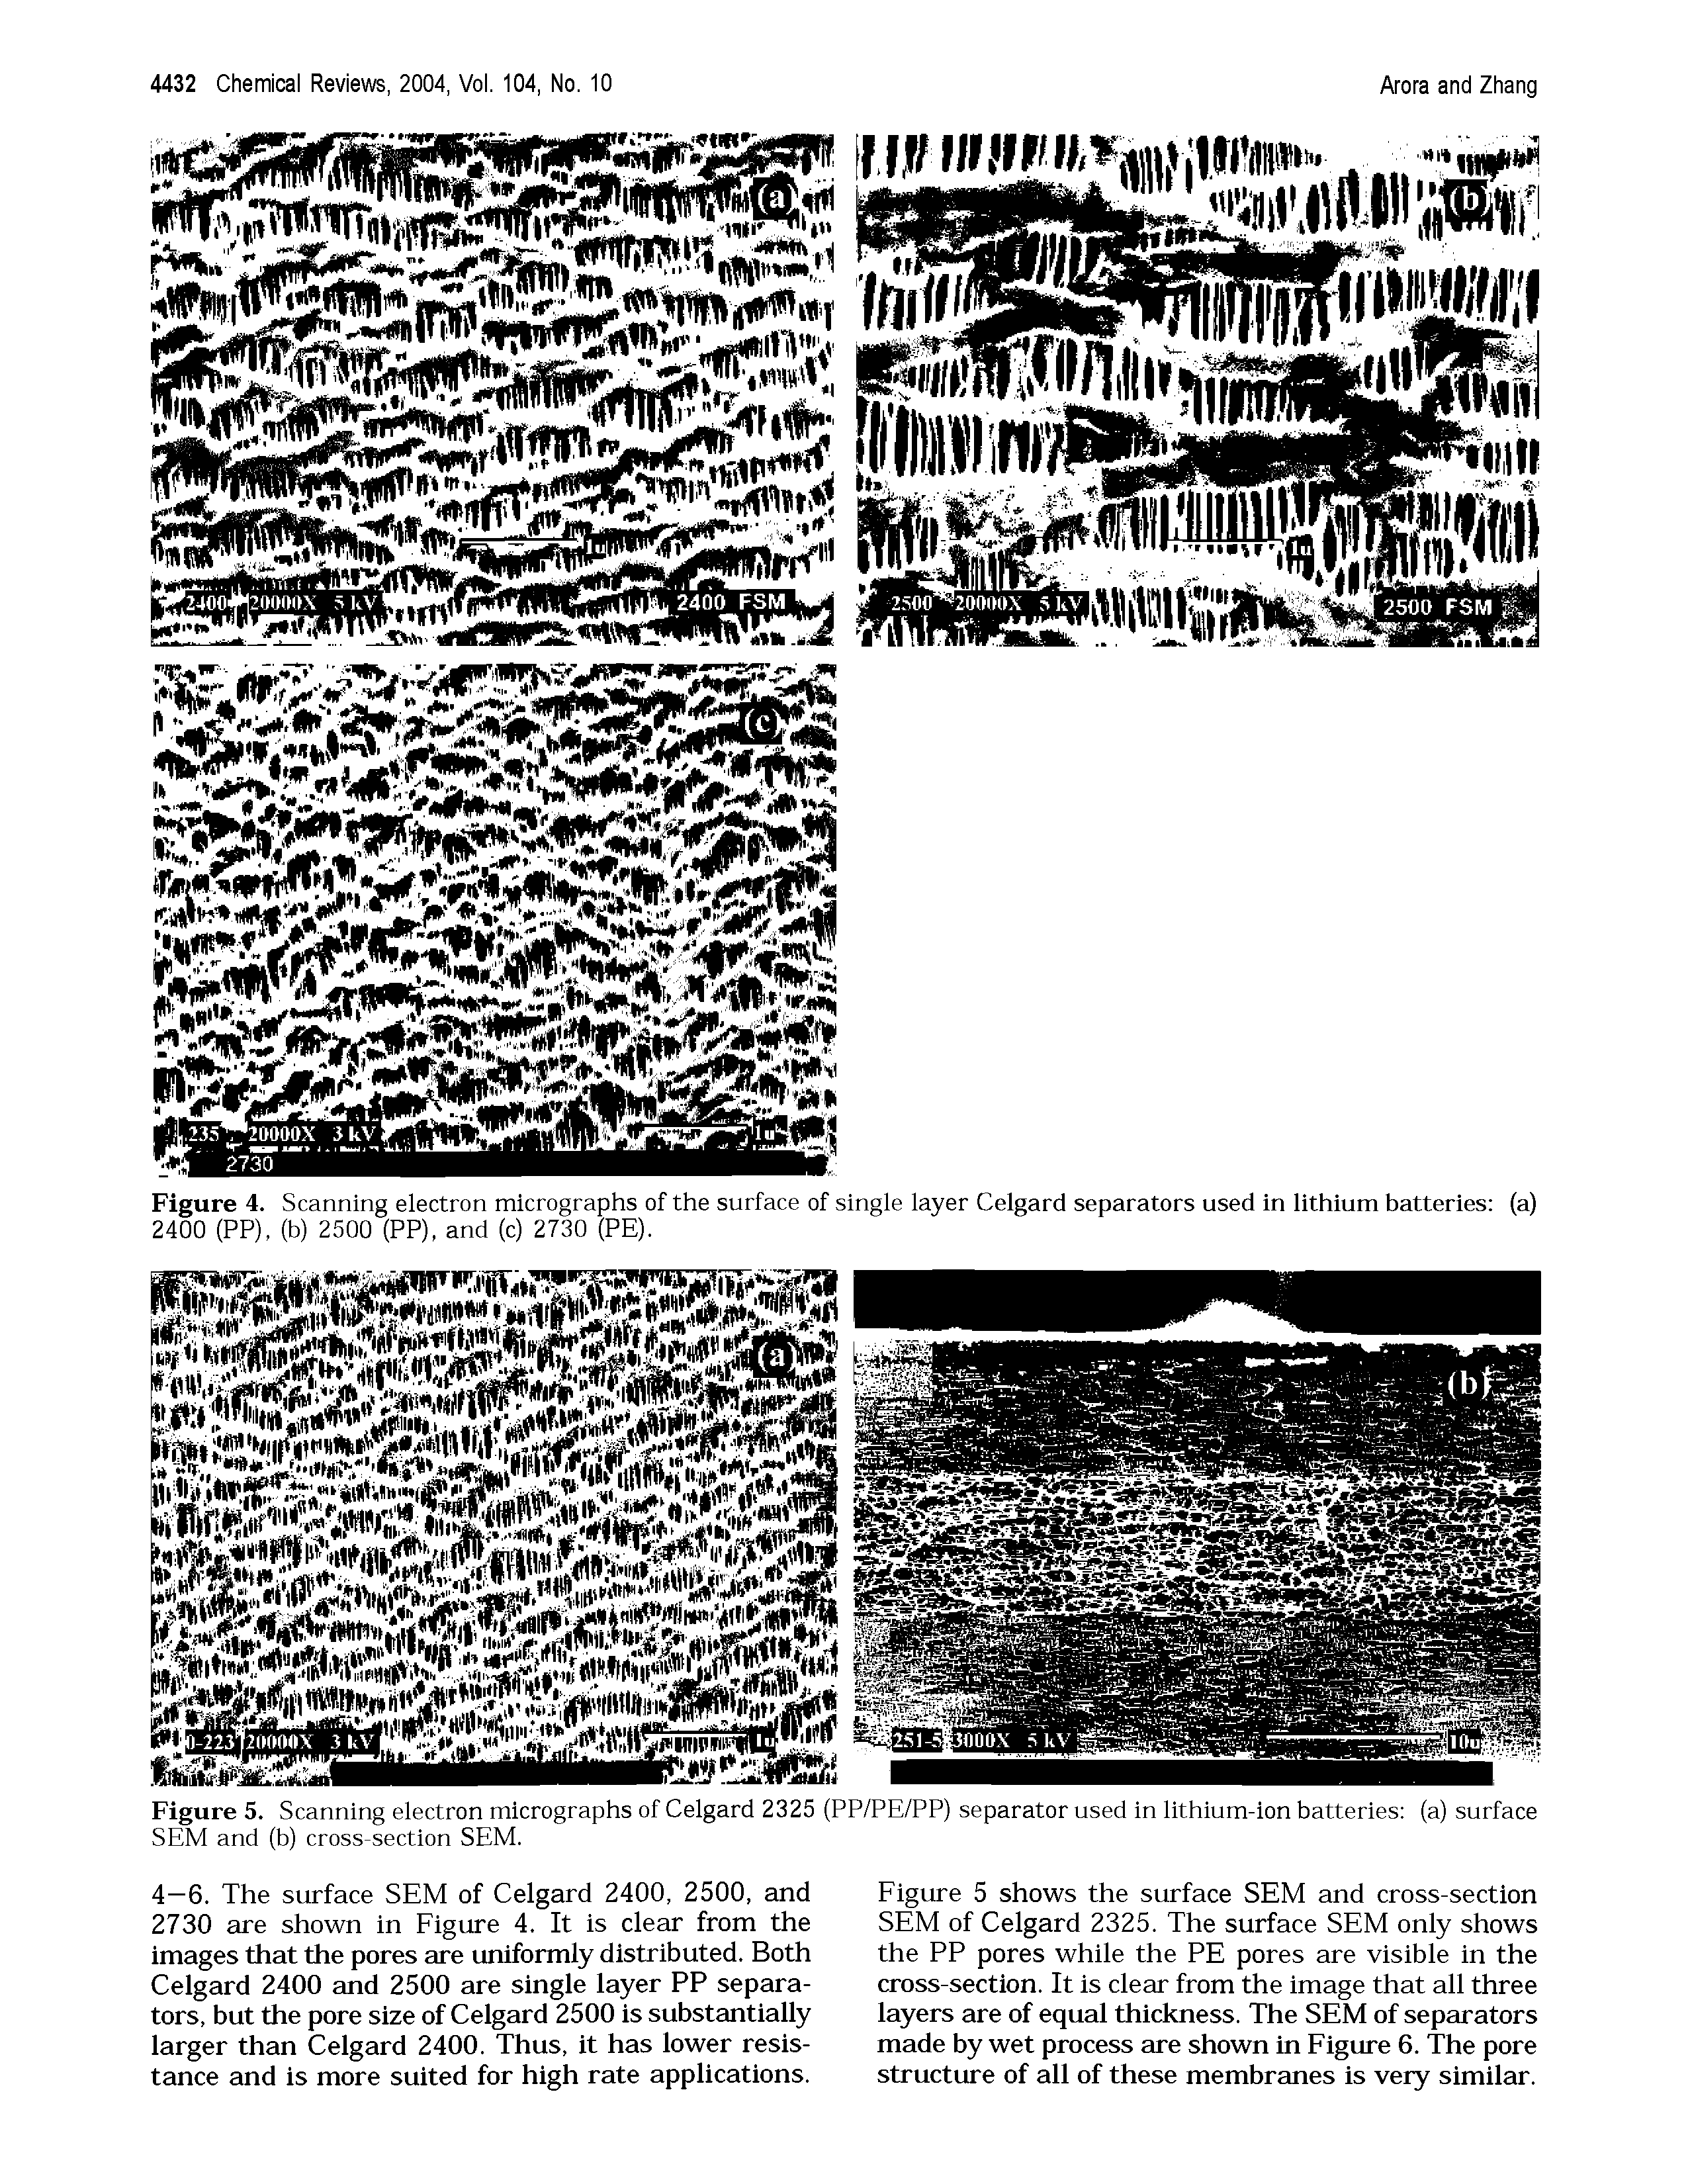 Figure 5 shows the surface SEM and cross-section SEM of Celgard 2325. The surface SEM only shows the PP pores while the PE pores are visible in the cross-section. It is clear from the image that all three layers are of equal thickness. The SEM of separators made by wet process are shown in Figure 6. The pore structure of all of these membranes is very similar.